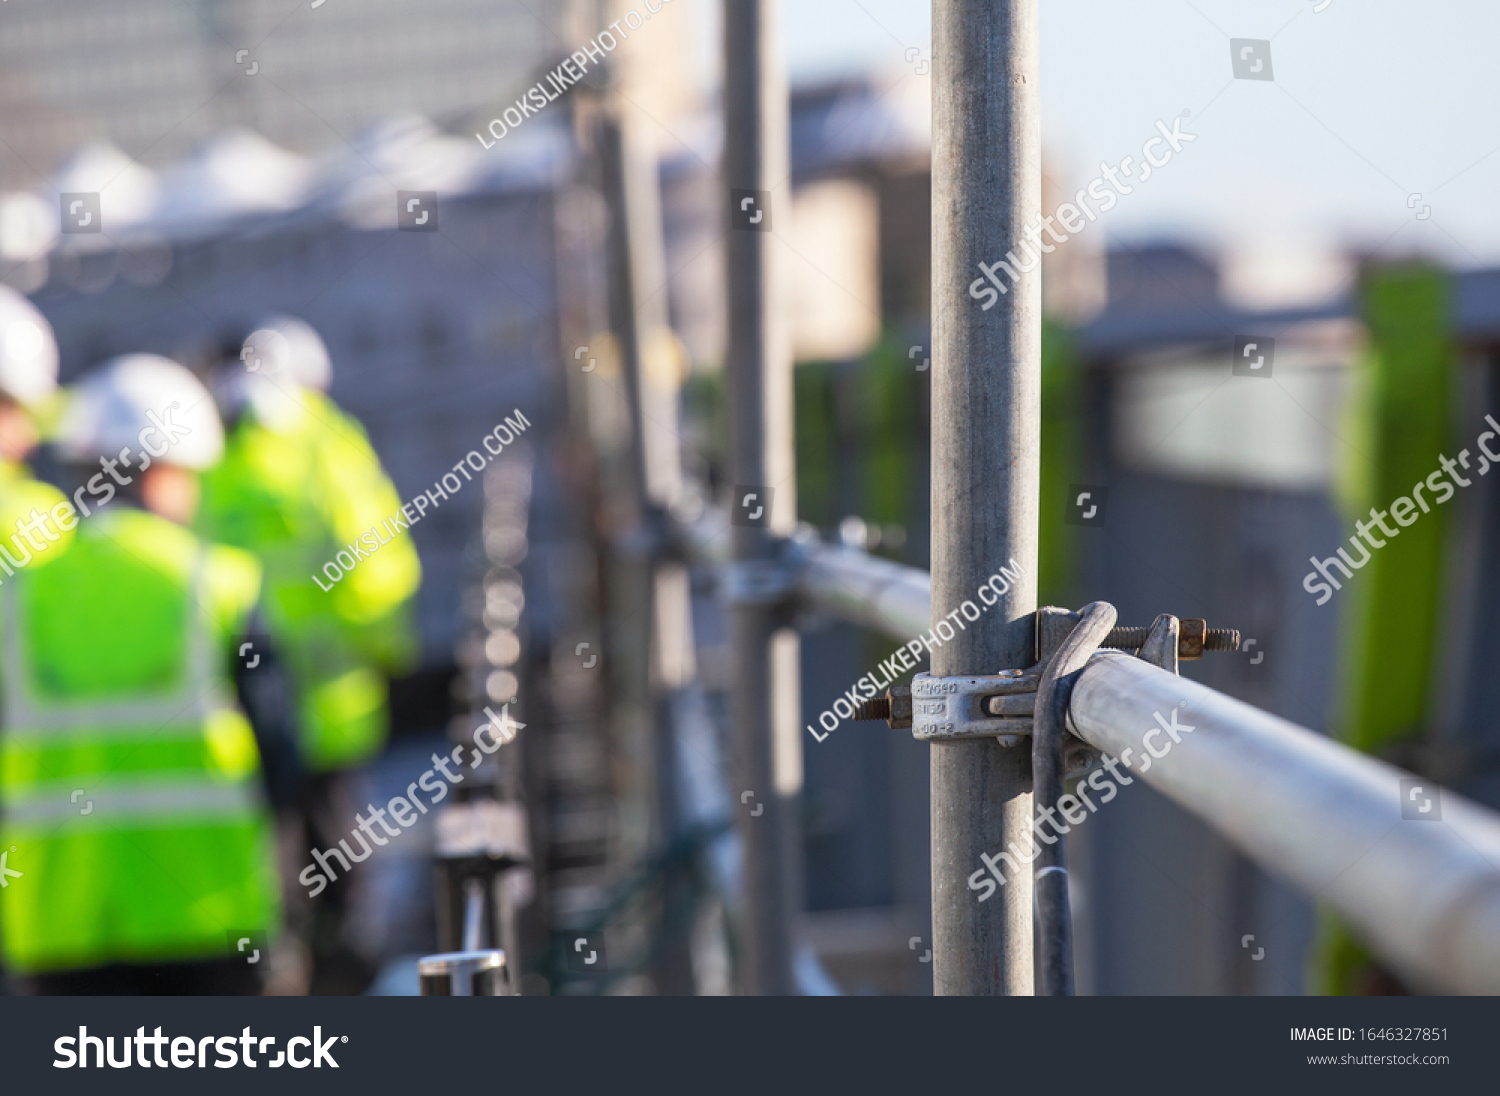 Architect on site Silhouette Construction workers on a scaffold. Extensive scaffolding providing platforms for work in progress. Men walking on roof surrounded by scaffold - Focus on scaffolding frame #1646327851